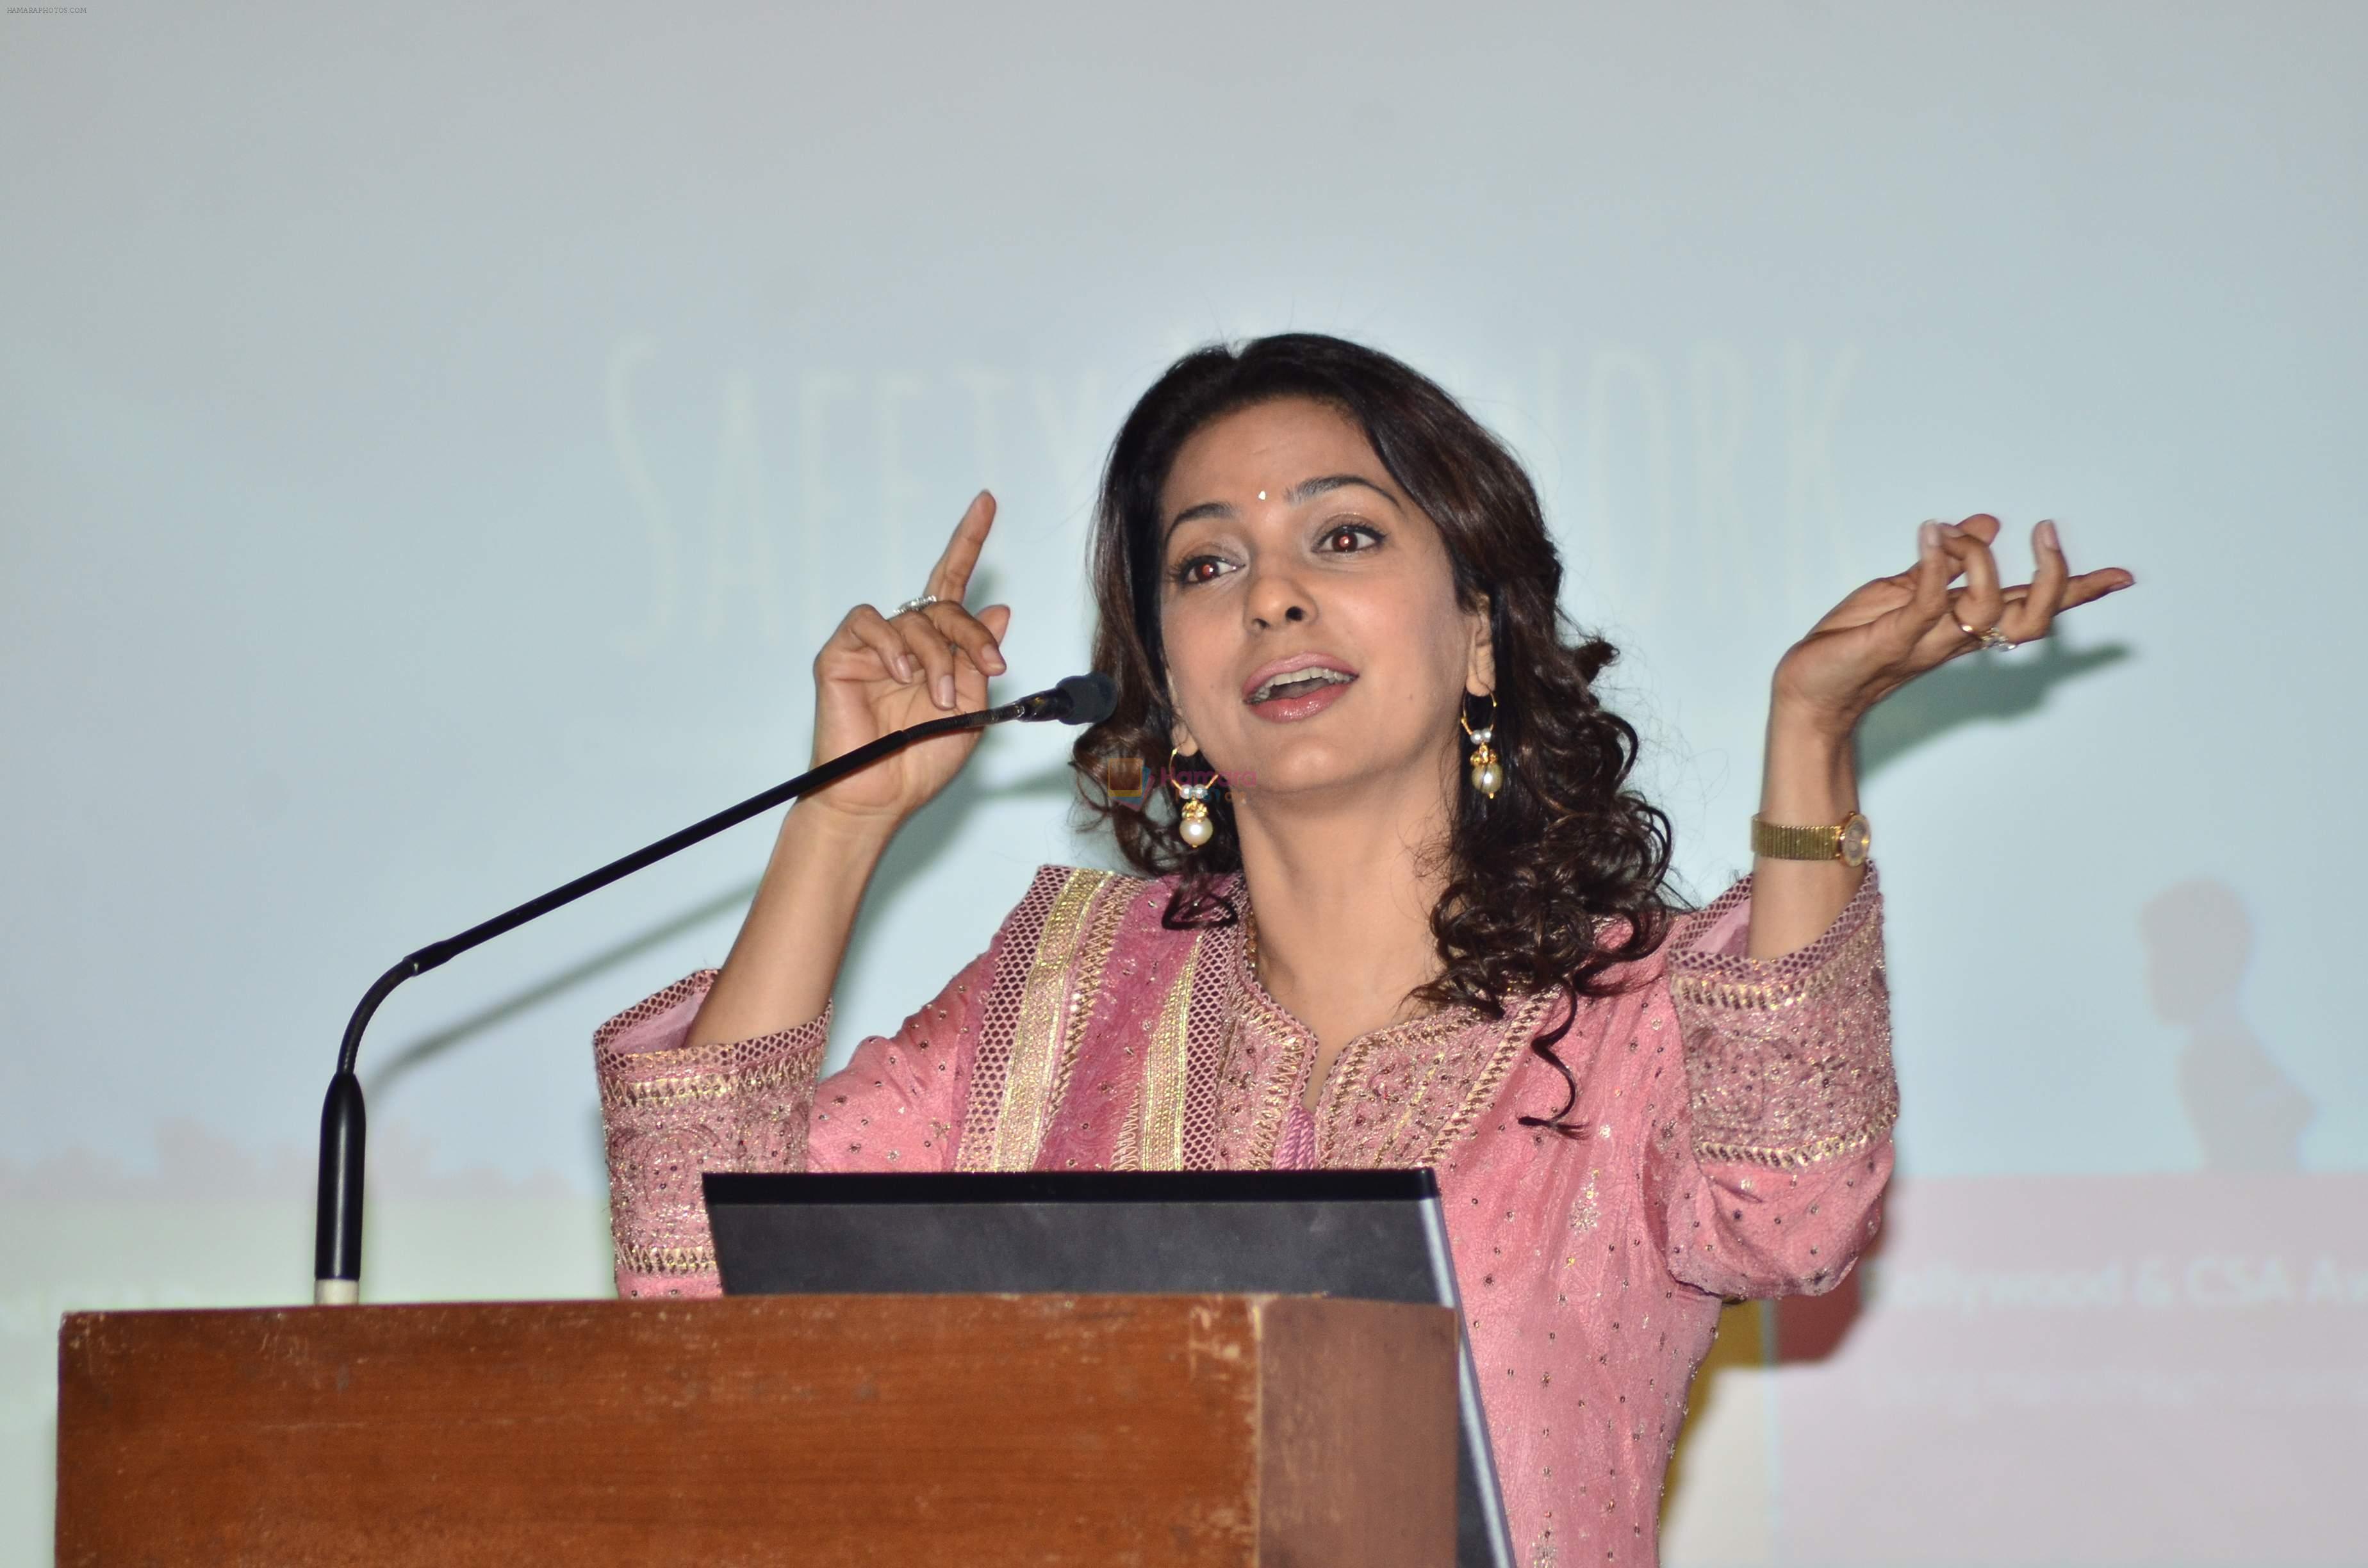 Juhi Chawla at the launch of India's first online portal on Child Sexual Abuse called www.aarambhindia.org on 18th Nov 2014